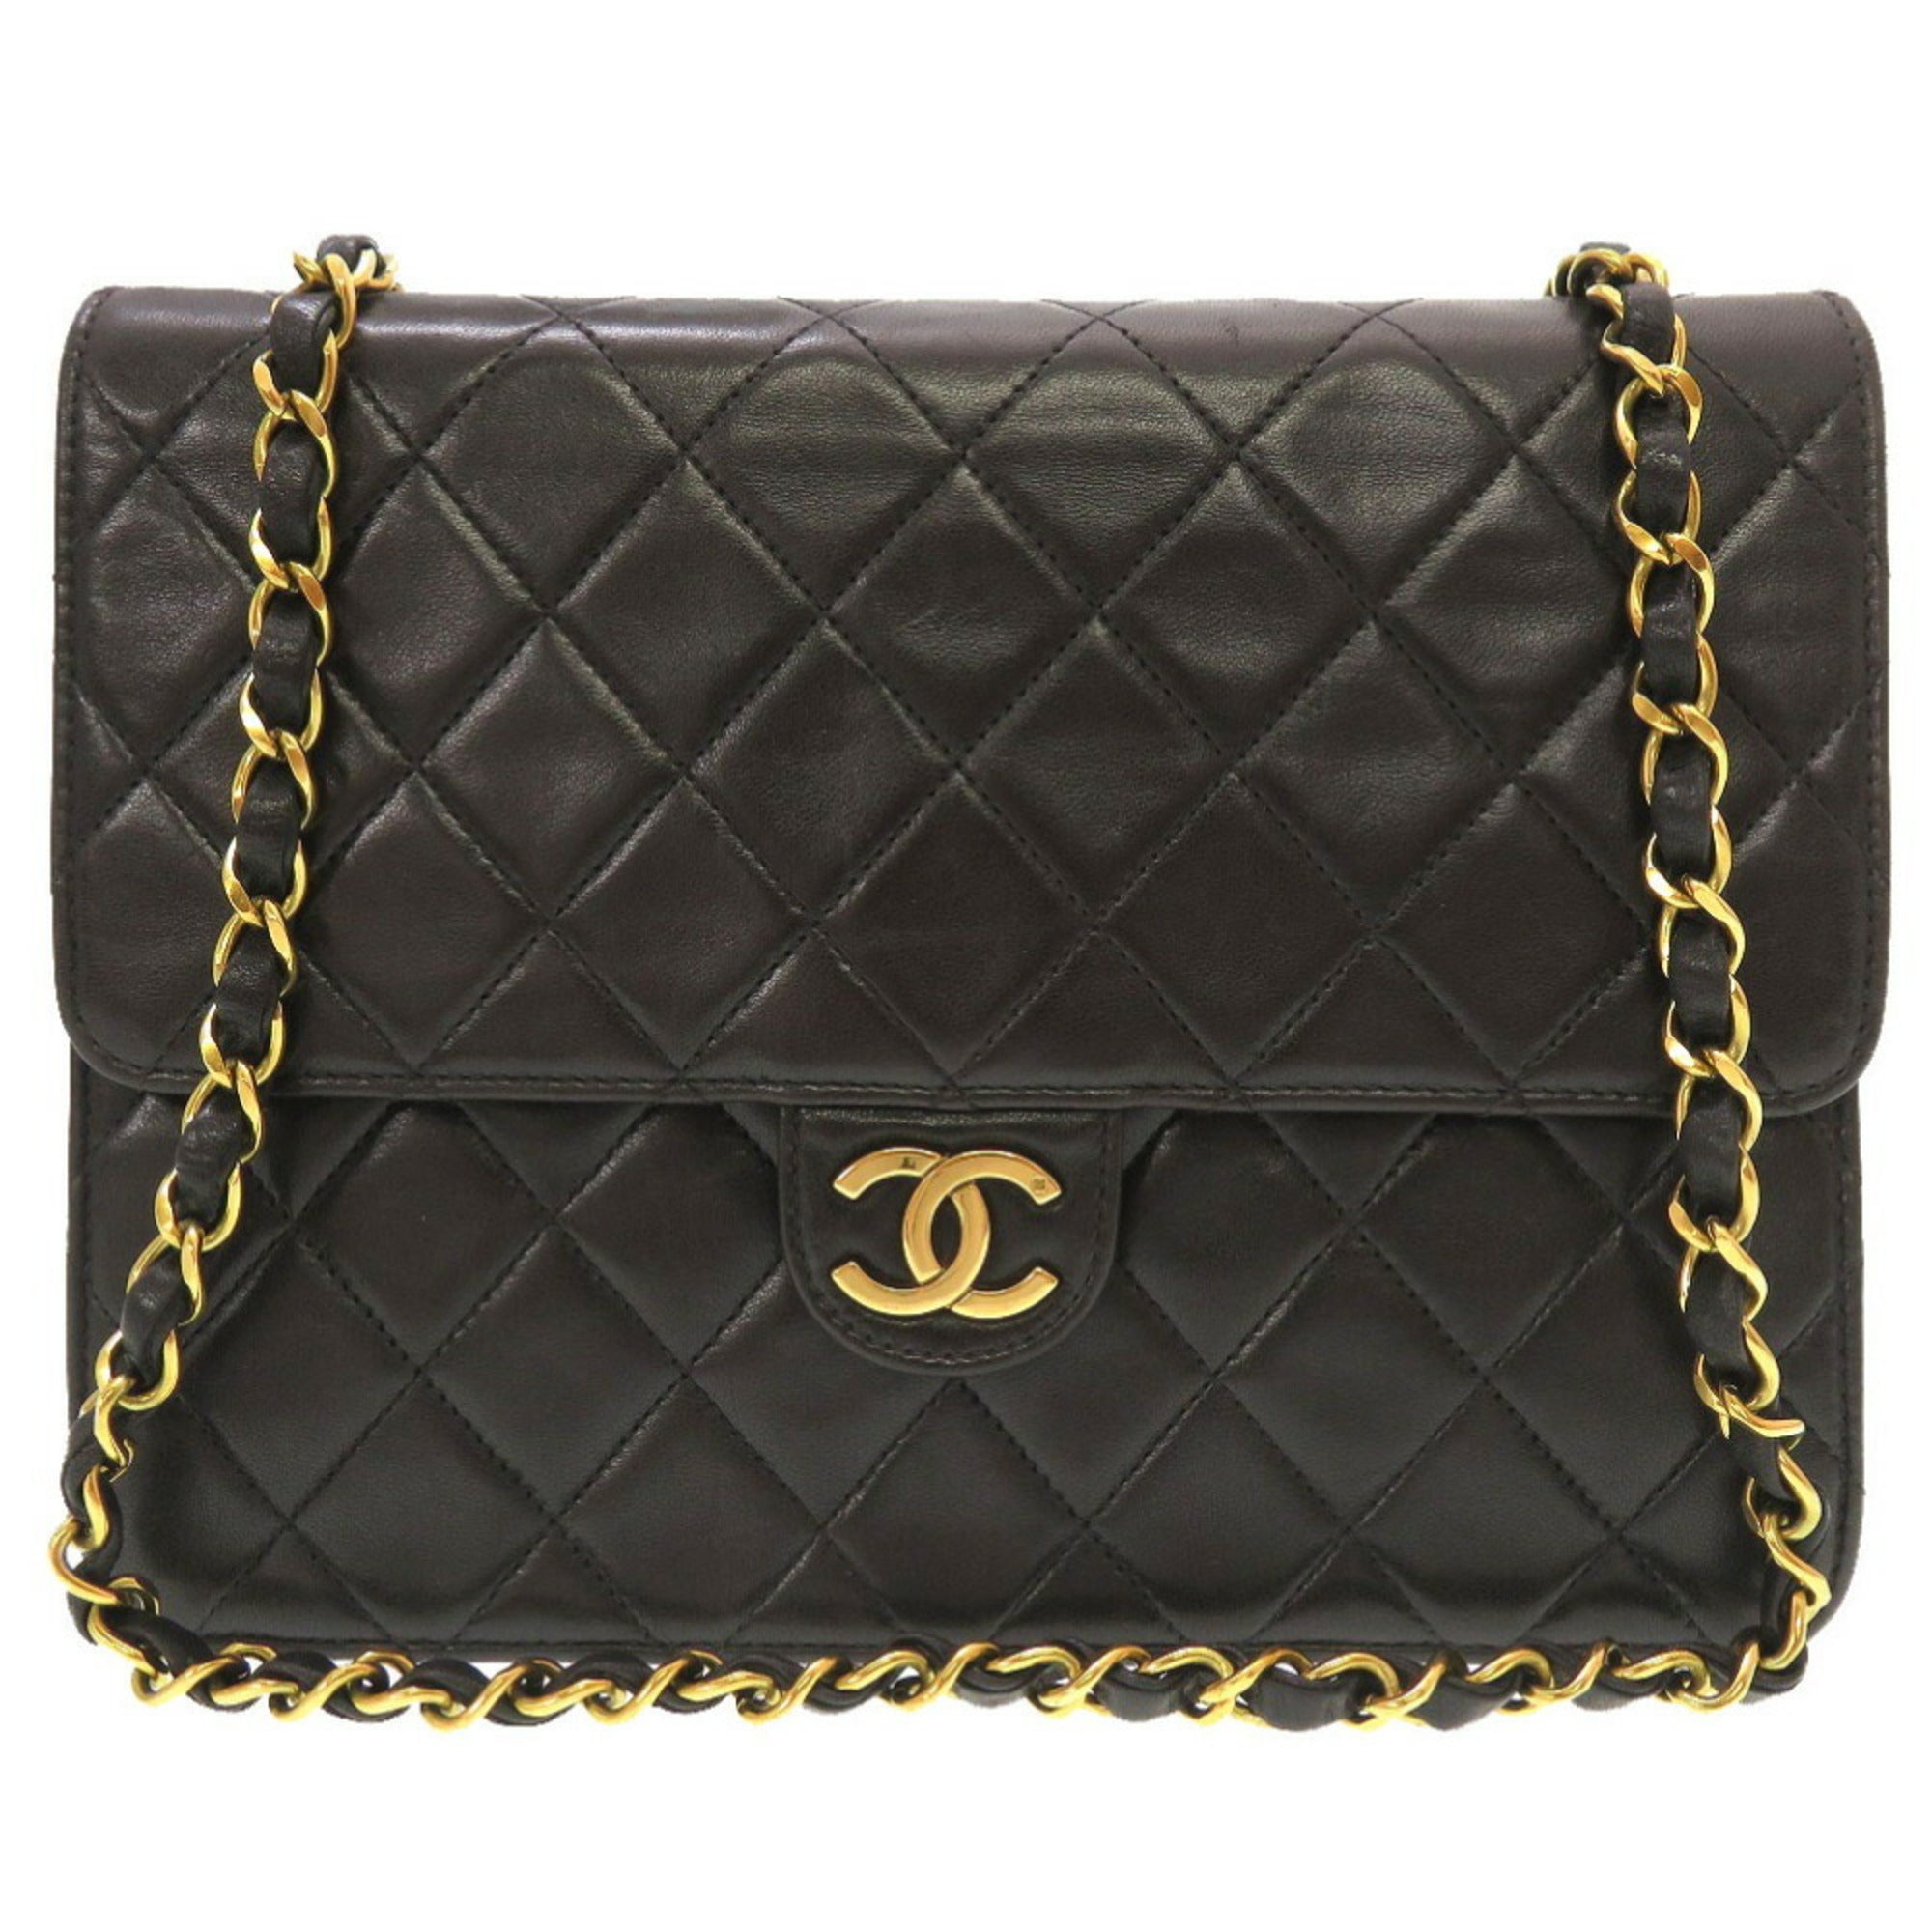 Timeless CHANEL black lamb leather and gold chain bag - VALOIS VINTAGE PARIS